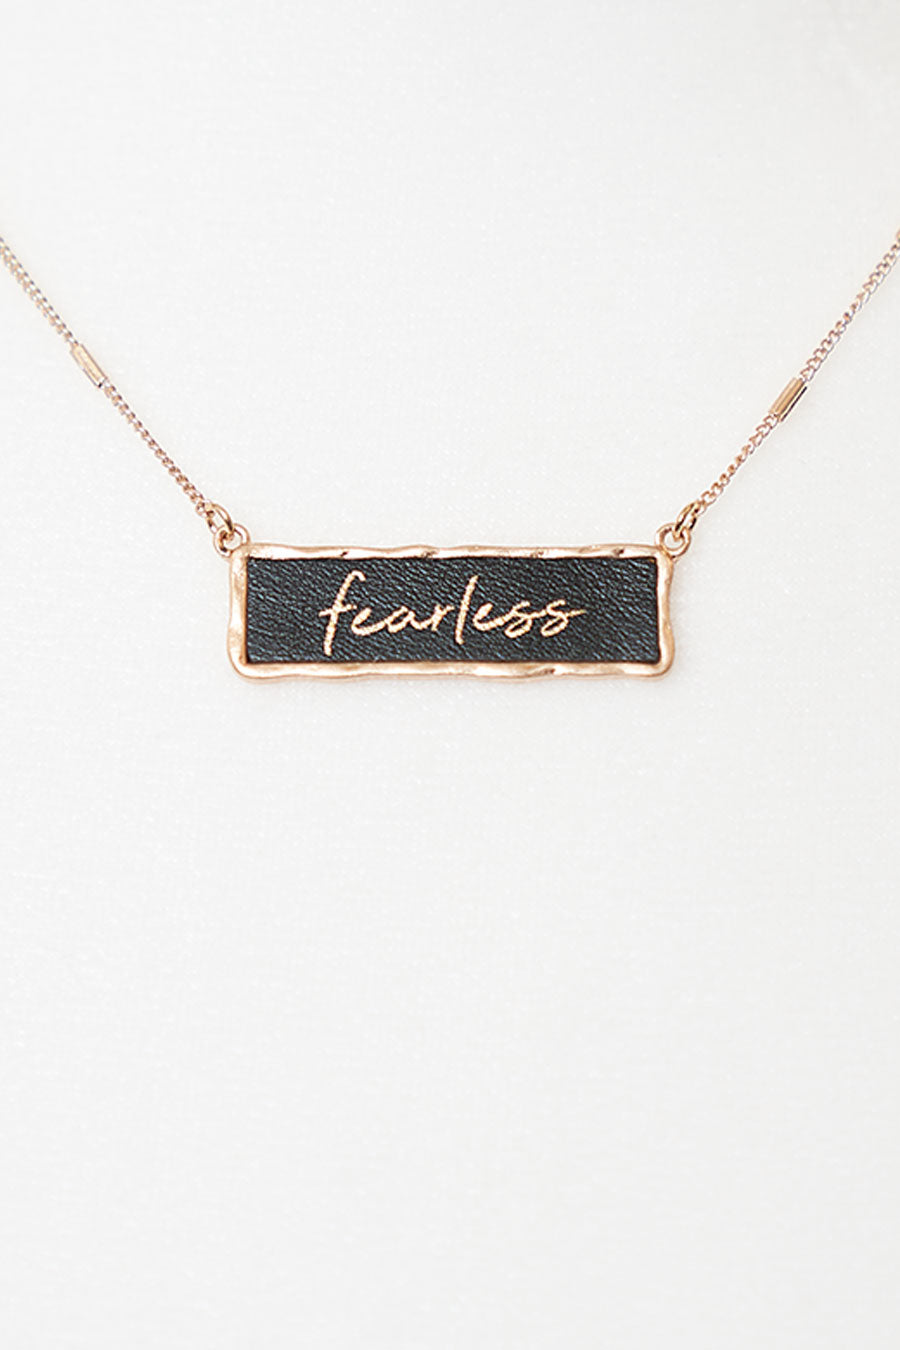 Fearless Necklace Zoomed